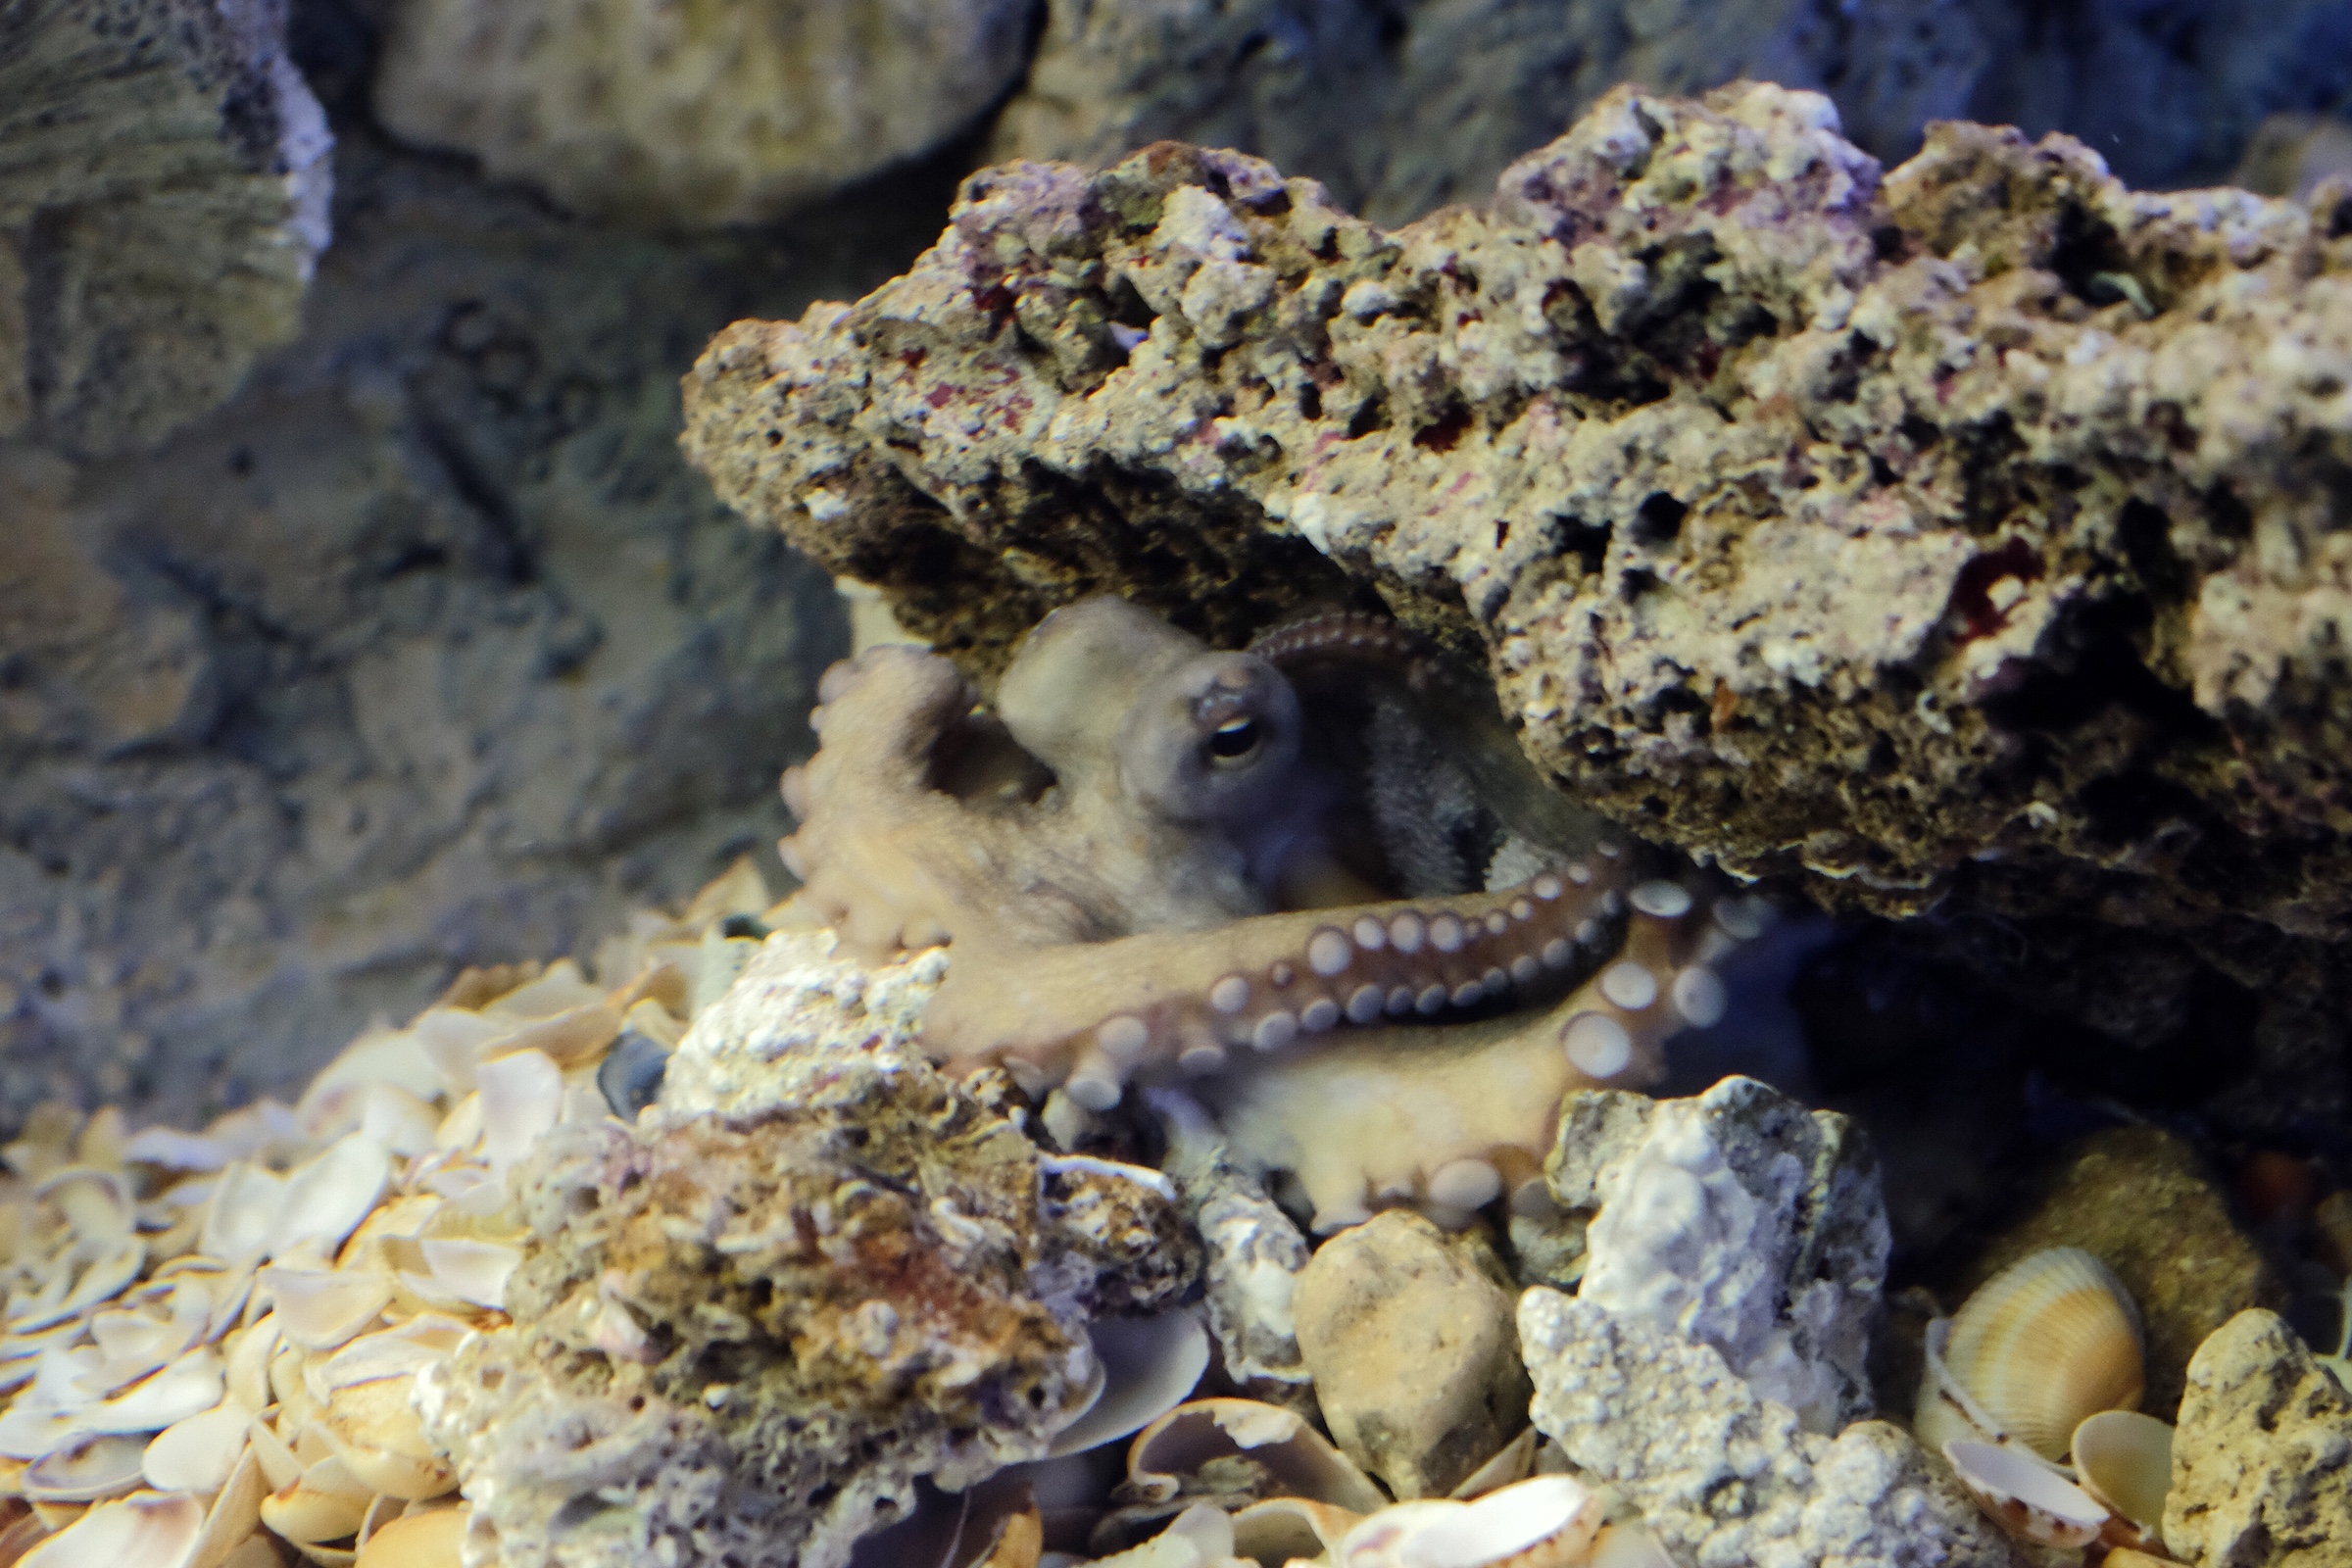 An octopus in the Alien Fish exhibit at Bioparco Roma.